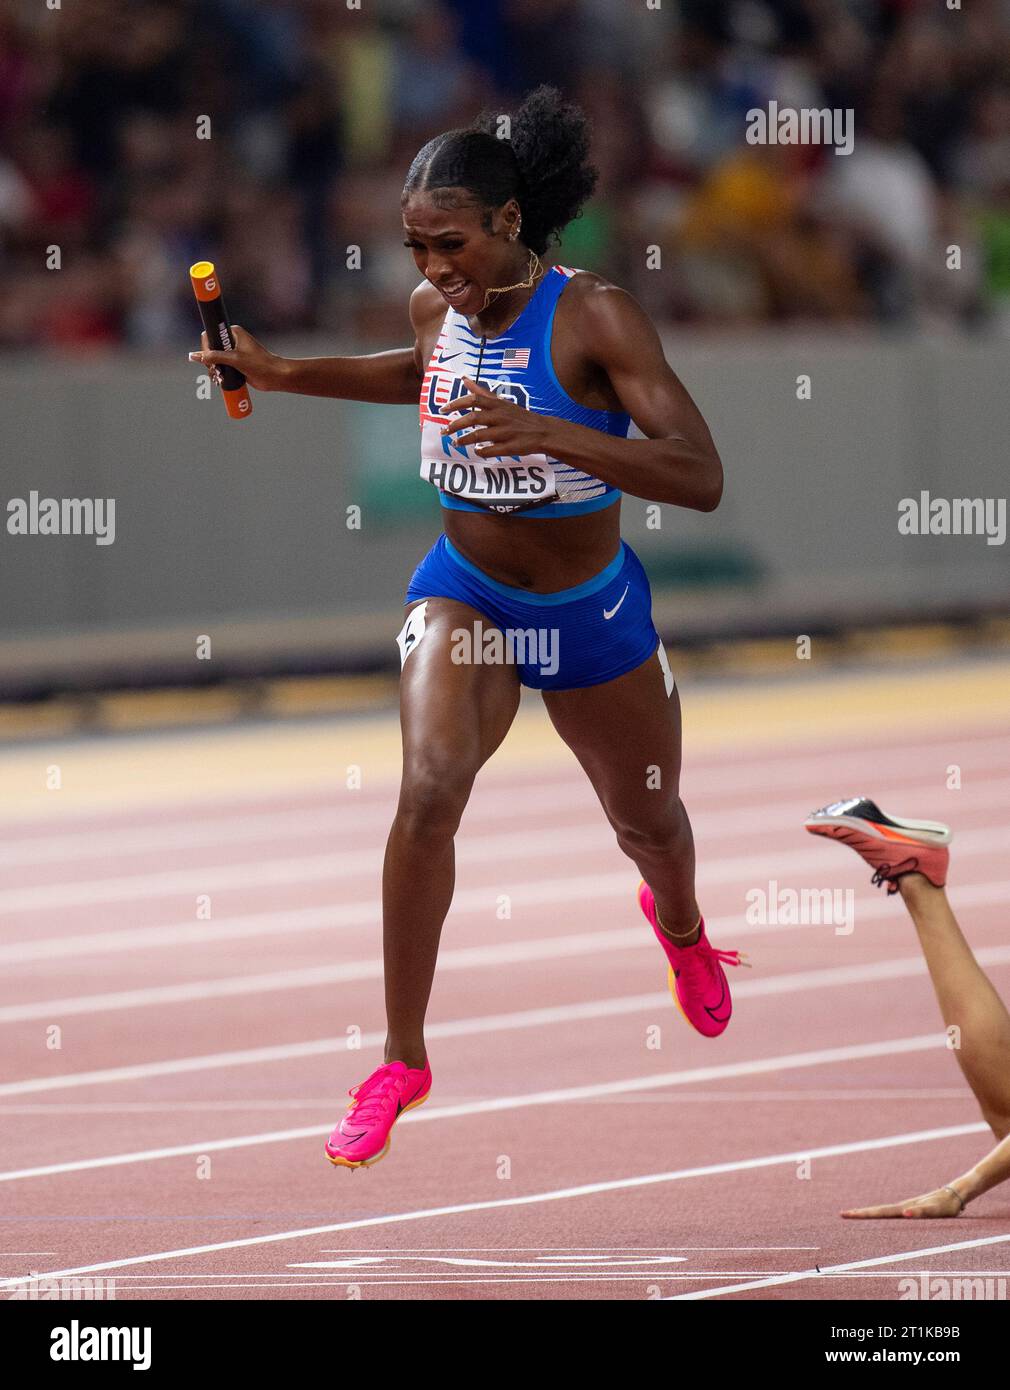 Alexis Holmes of the USA competing in the mixed 4x400m relay at the ...